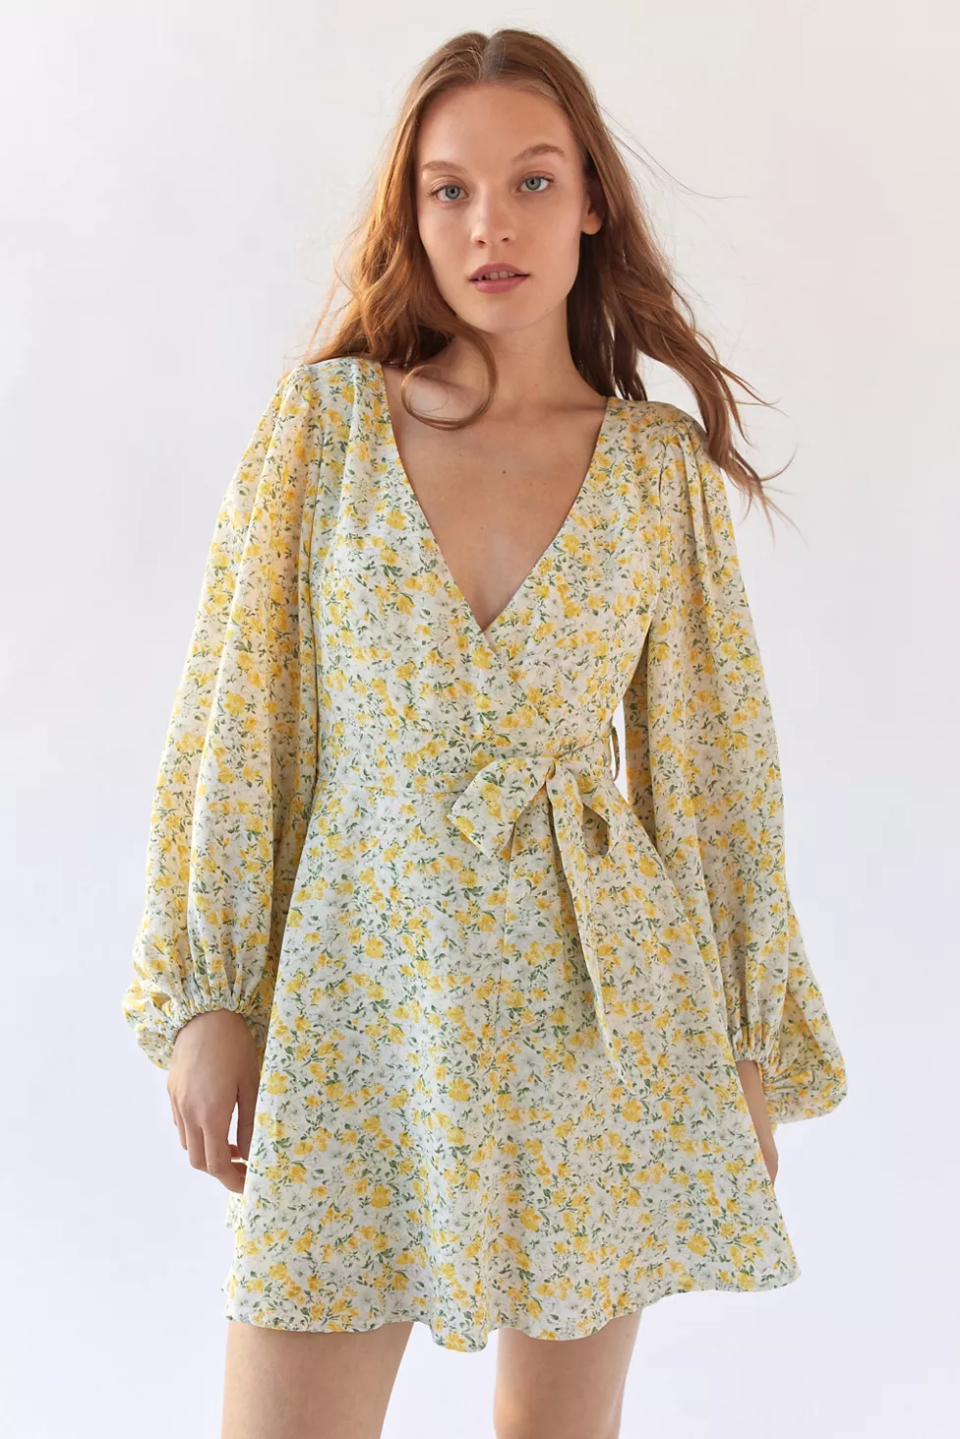 <br><br><strong>Kiss The Sky</strong> Long Sleeve Mini Dress, $, available at <a href="https://go.skimresources.com/?id=30283X879131&url=https%3A%2F%2Fwww.urbanoutfitters.com%2Fshop%2Fkiss-the-sky-long-sleeve-mini-dress" rel="nofollow noopener" target="_blank" data-ylk="slk:Urban Outfitters" class="link ">Urban Outfitters</a>